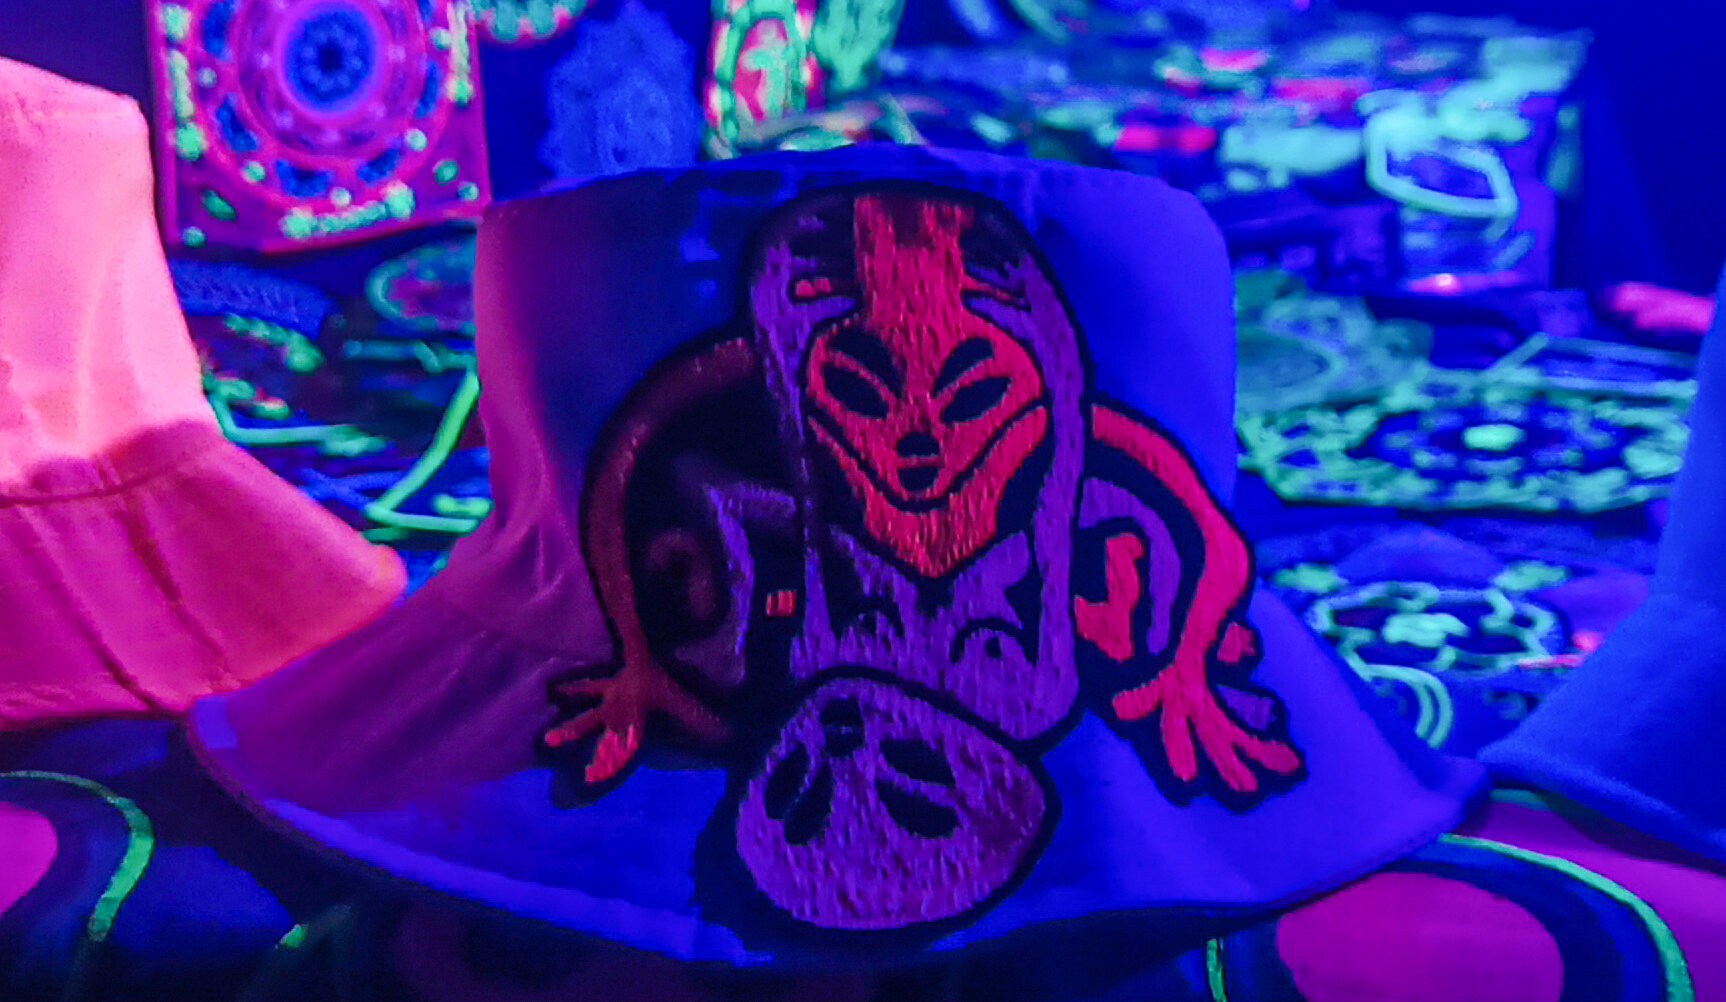 Funny Alien Love UV Purple Fisher Hat blacklight glowing with embroidery patch psychedelic trance goatrance hippie fisherhat Psy Goa Gear